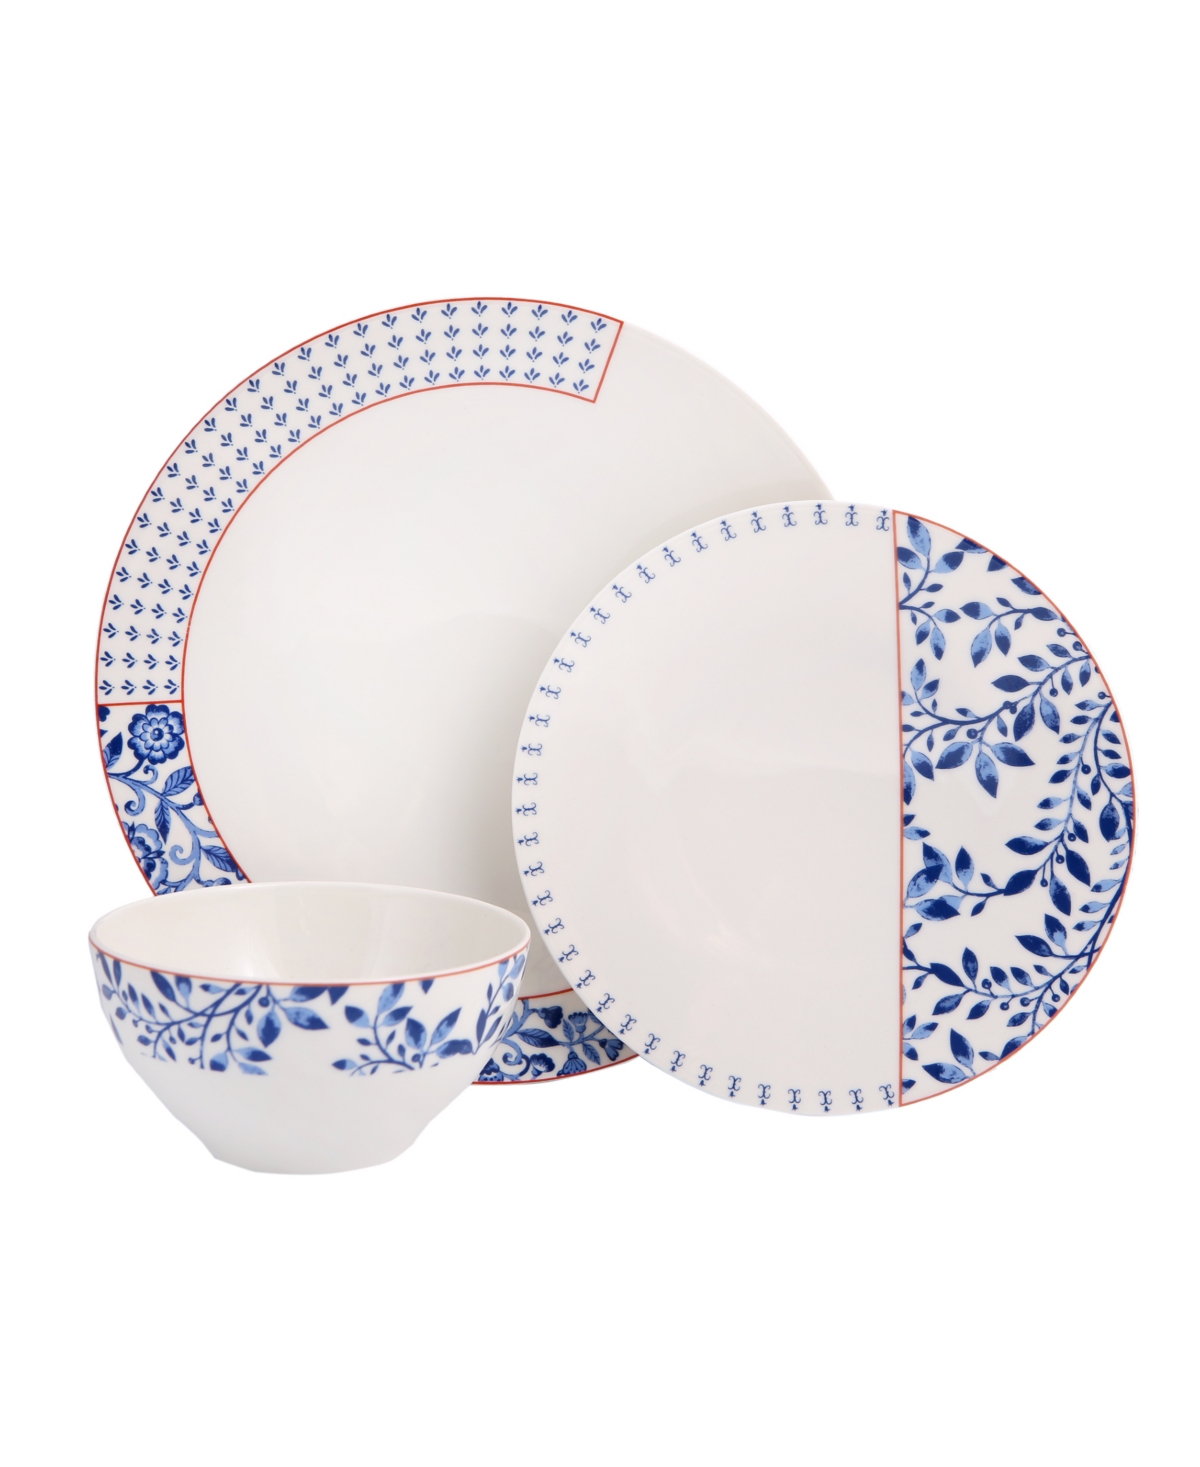 Folksy 3-Piece Place Setting Set - Blue and White